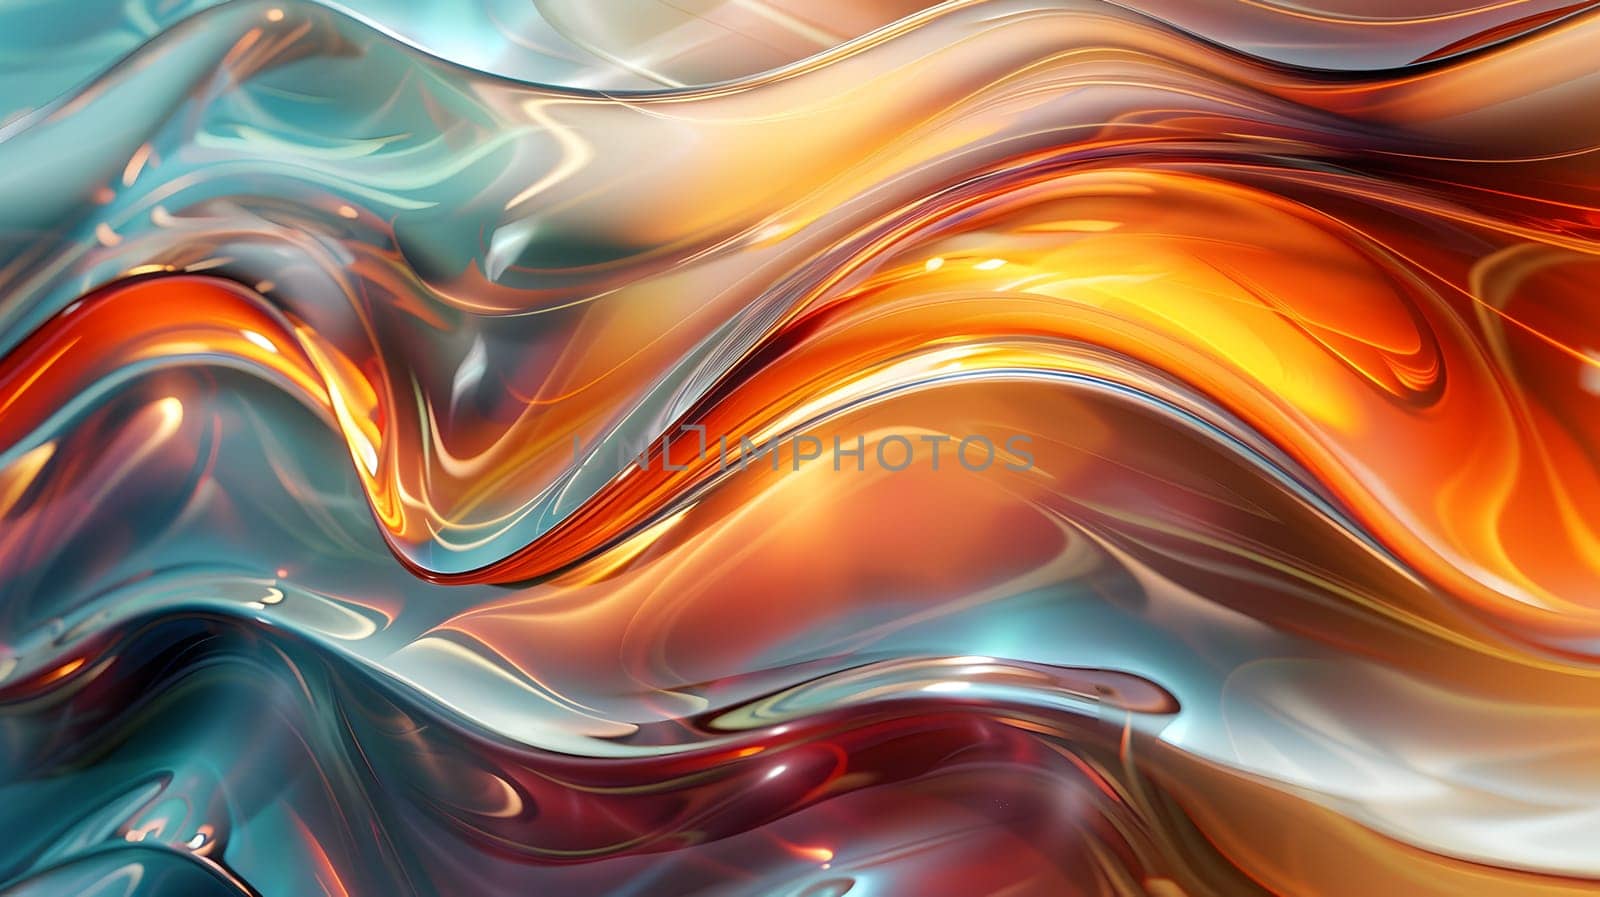 A closeup of a vibrant abstract painting resembling a fluid organism with orange and electric blue colors. It showcases intricate patterns and fractal art details through macro photography